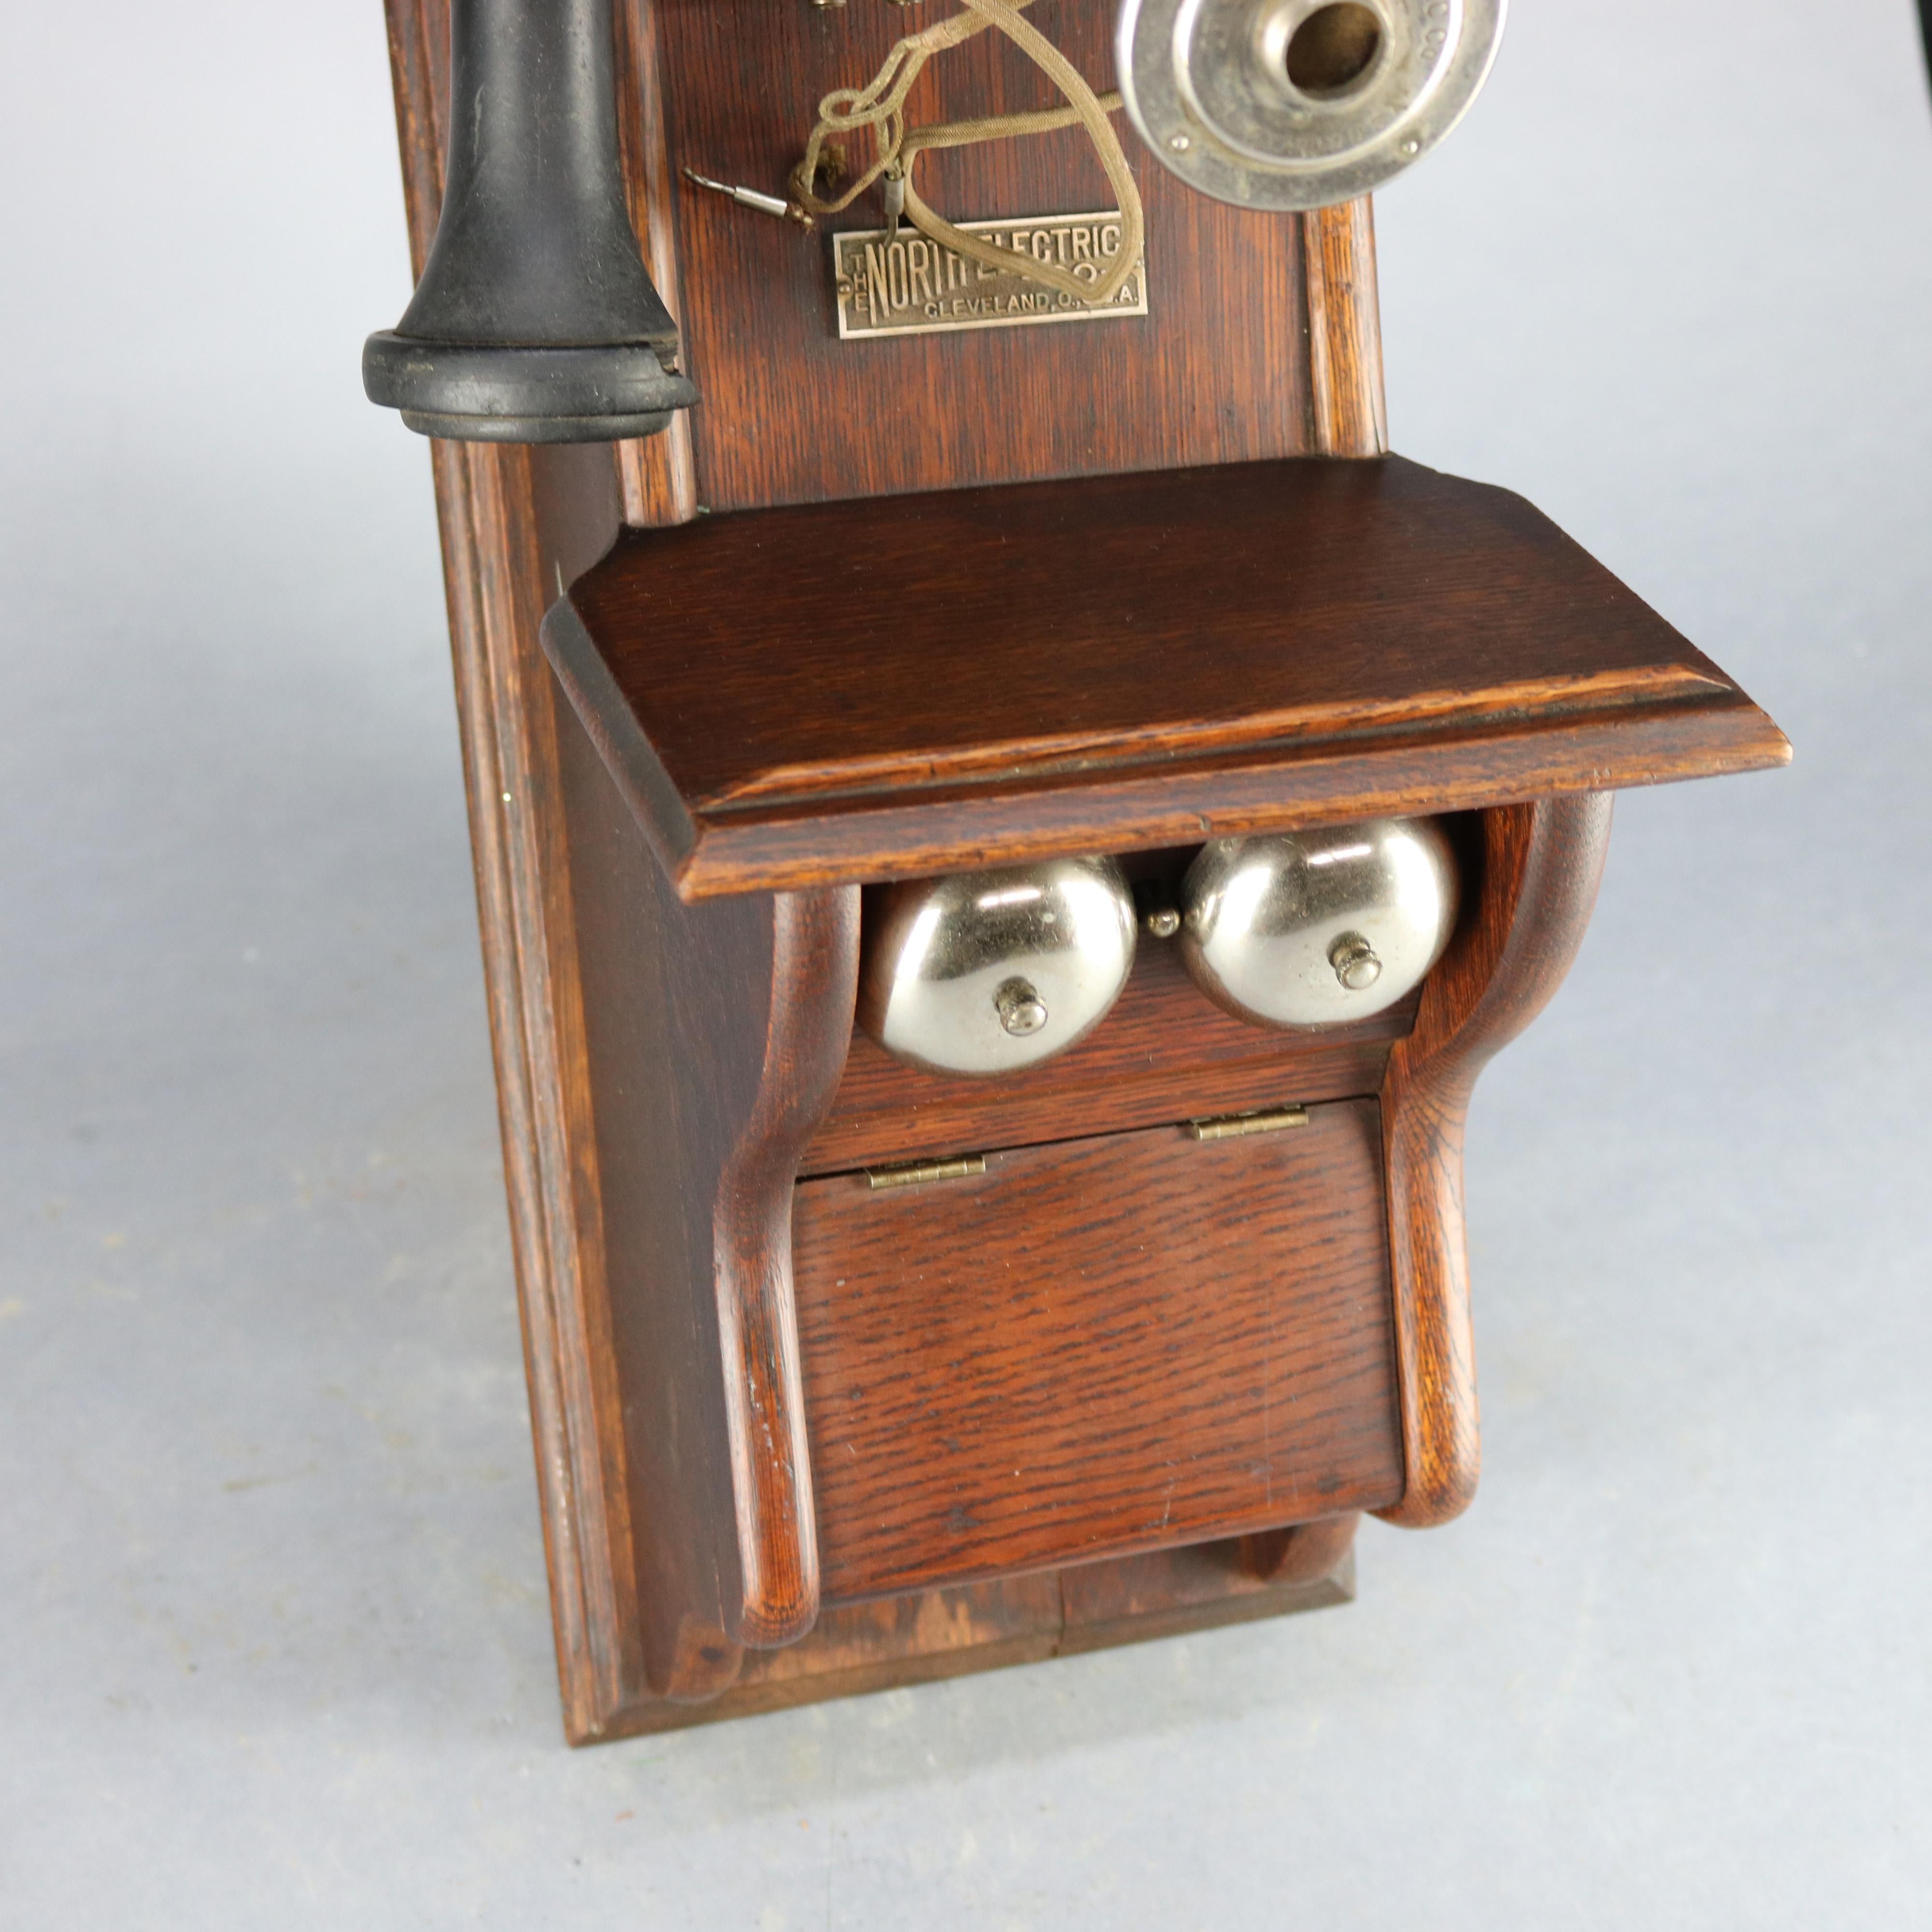 Antique North Electric Paddle Type Oak Wall Telephone, circa 1890 3